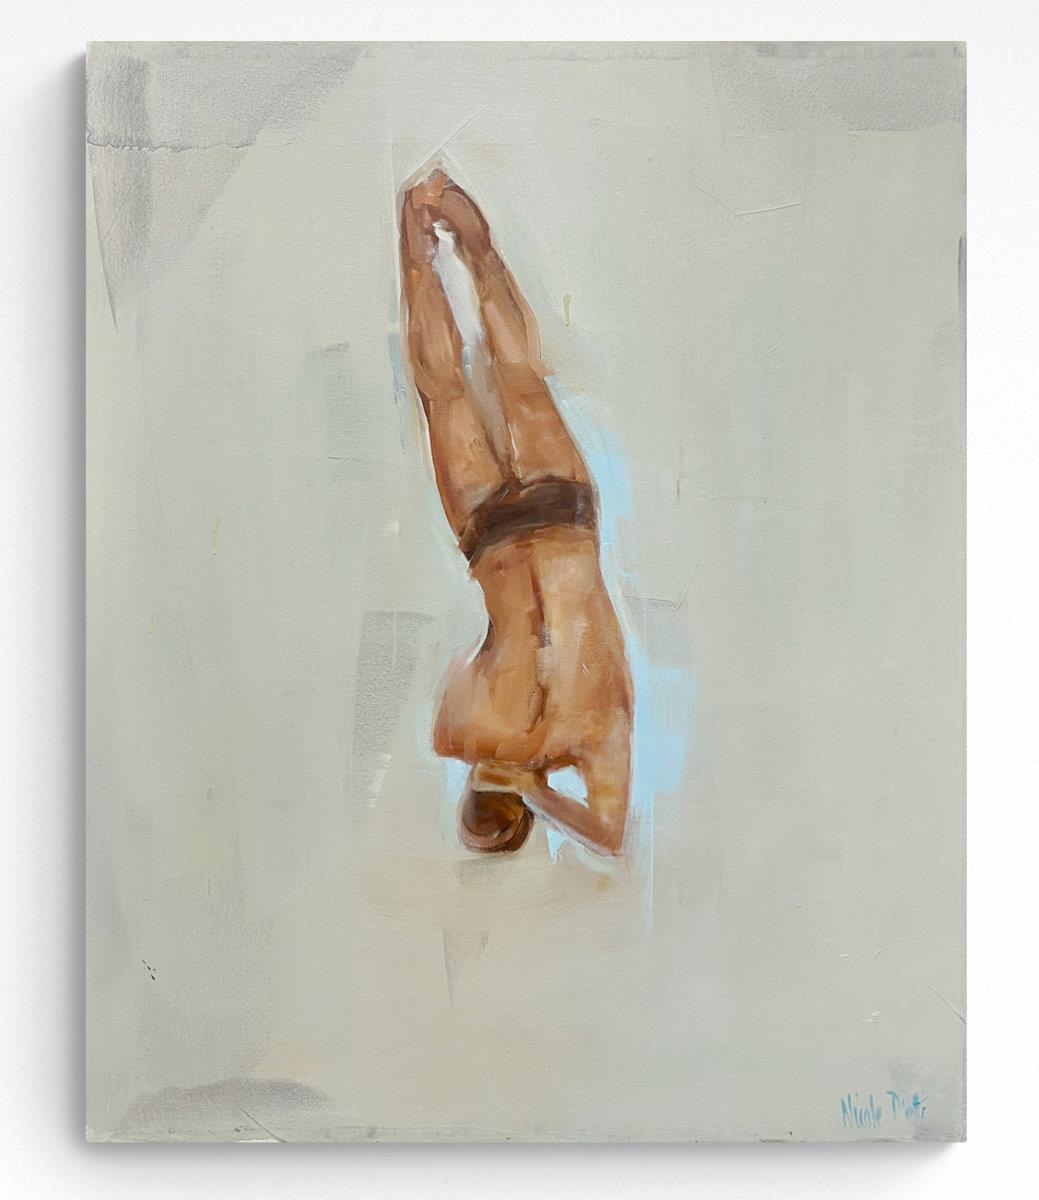 painting on canvas of a man diving into water